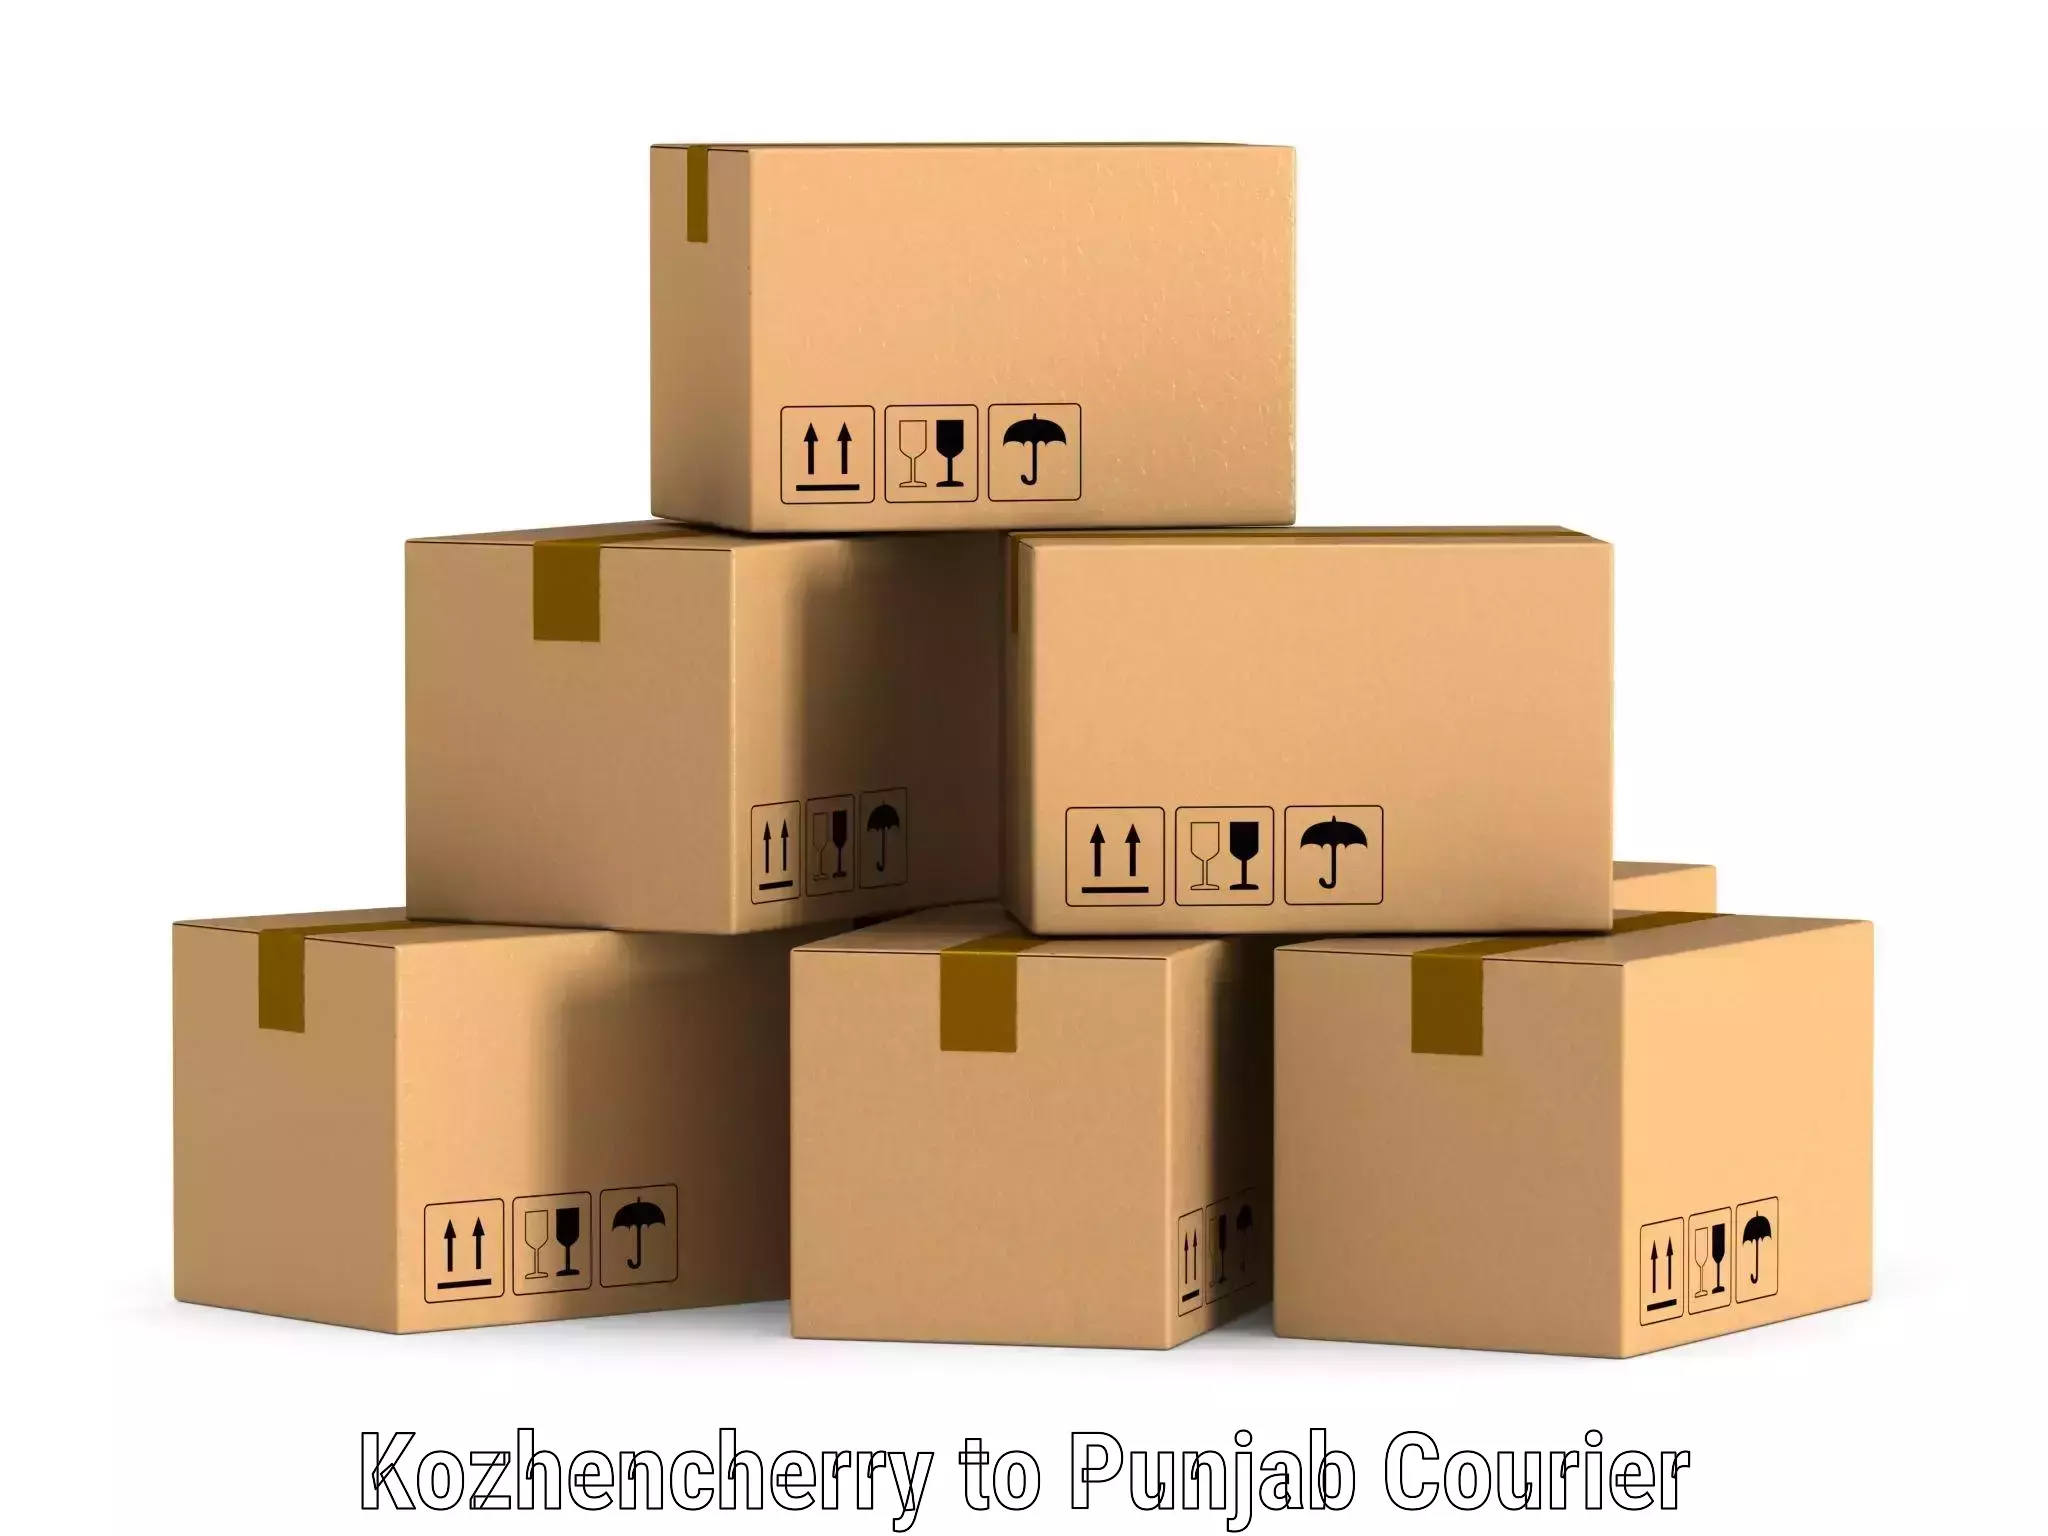 High-capacity courier solutions Kozhencherry to Patiala